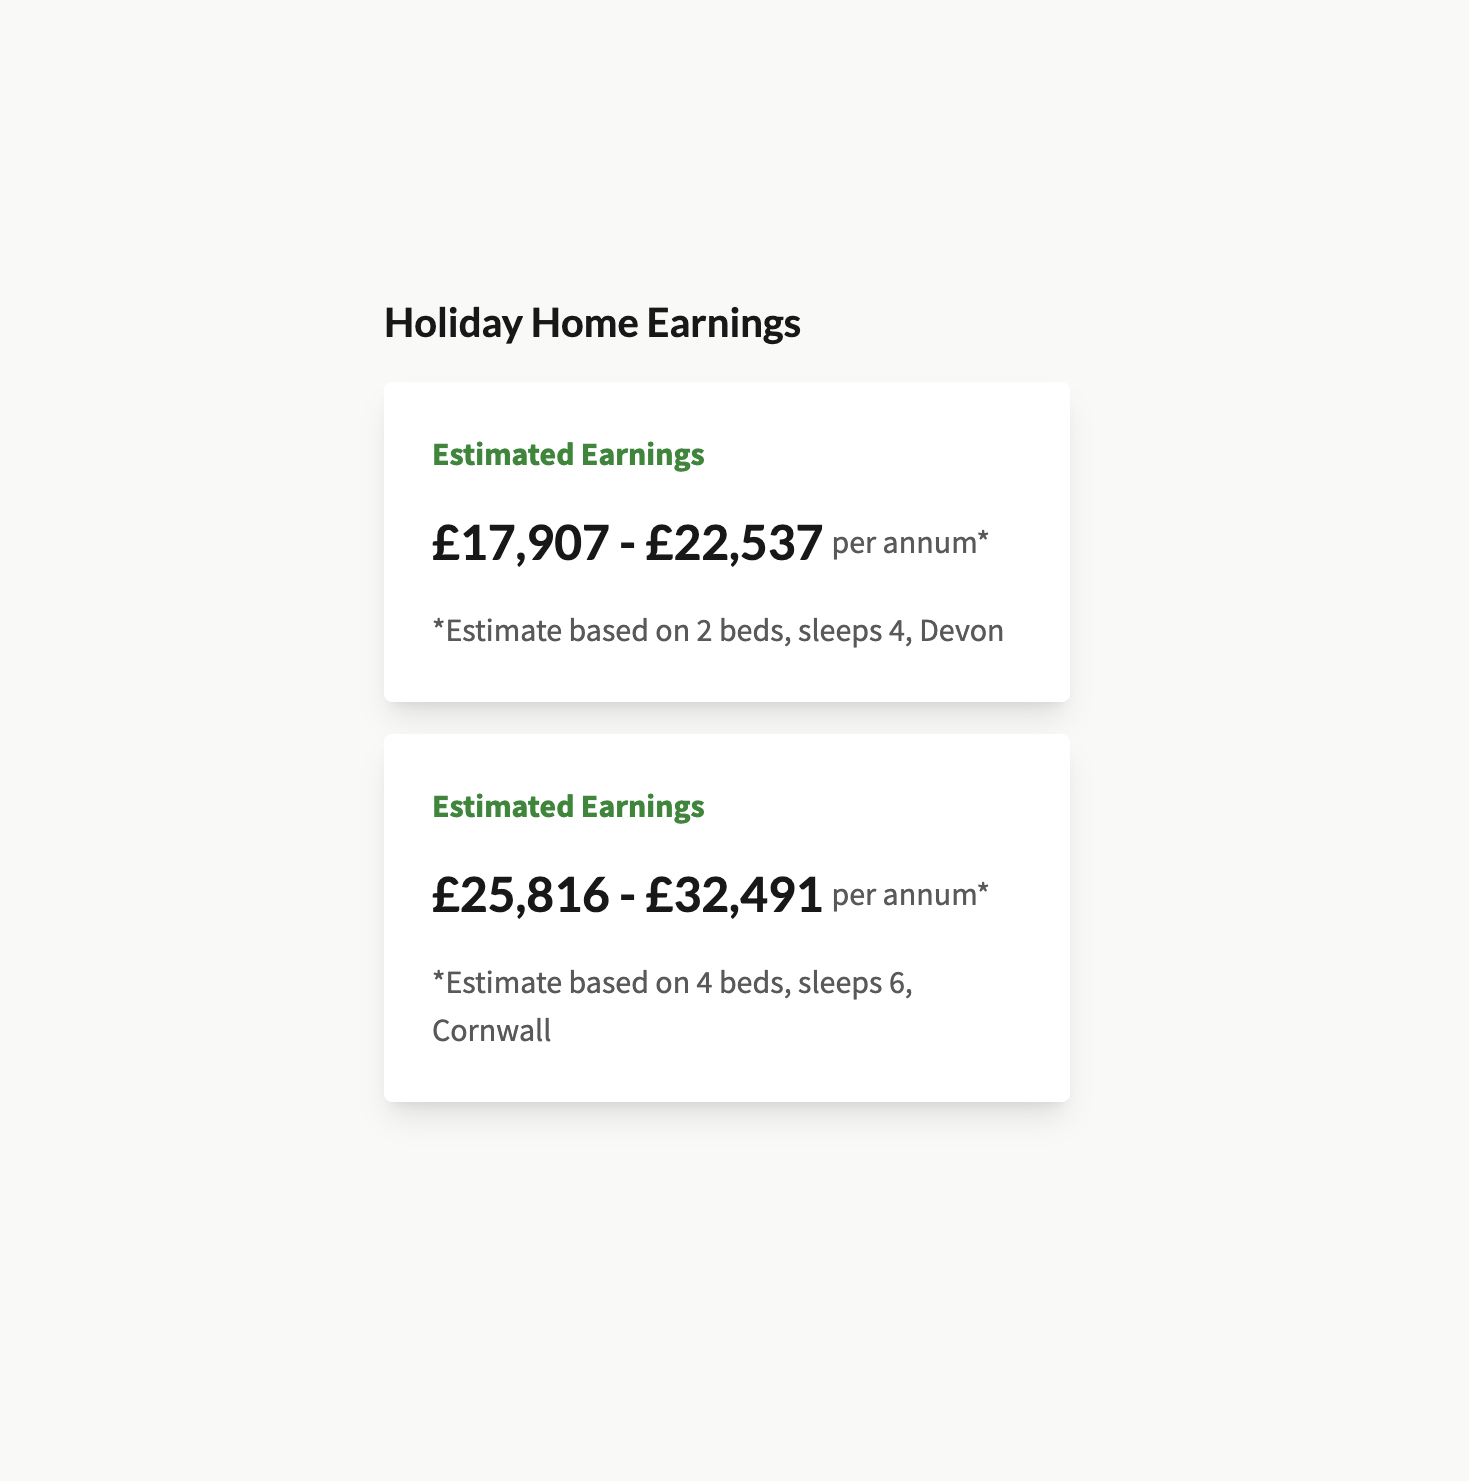 Tipical holiday home earnings